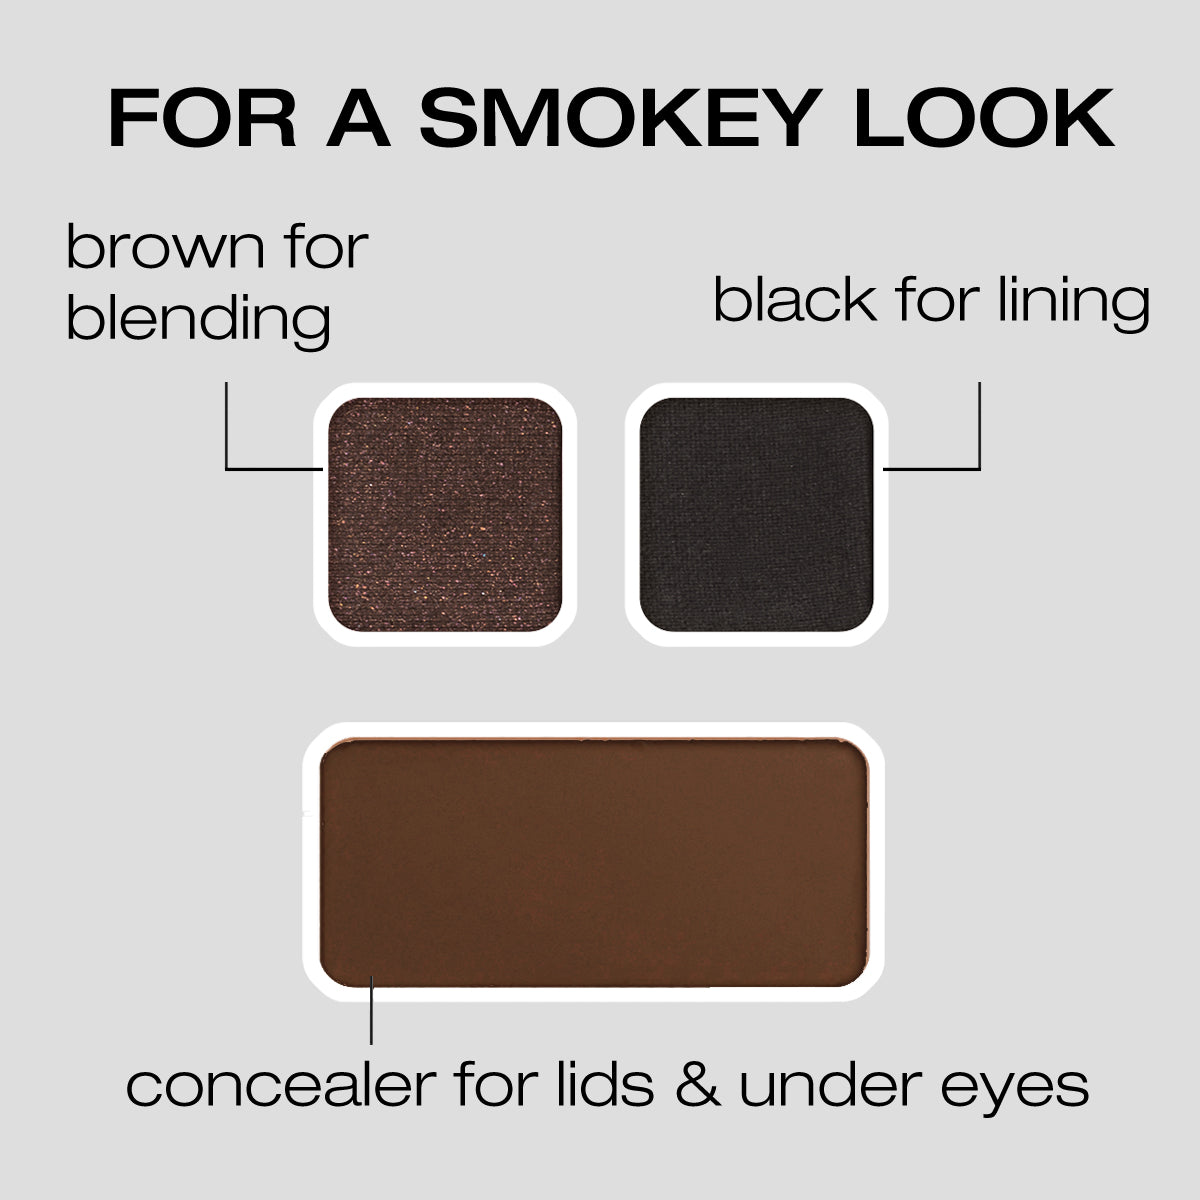 For a Smokey Look: Brown for blending, black for lining, concealer for lids & Under eyes